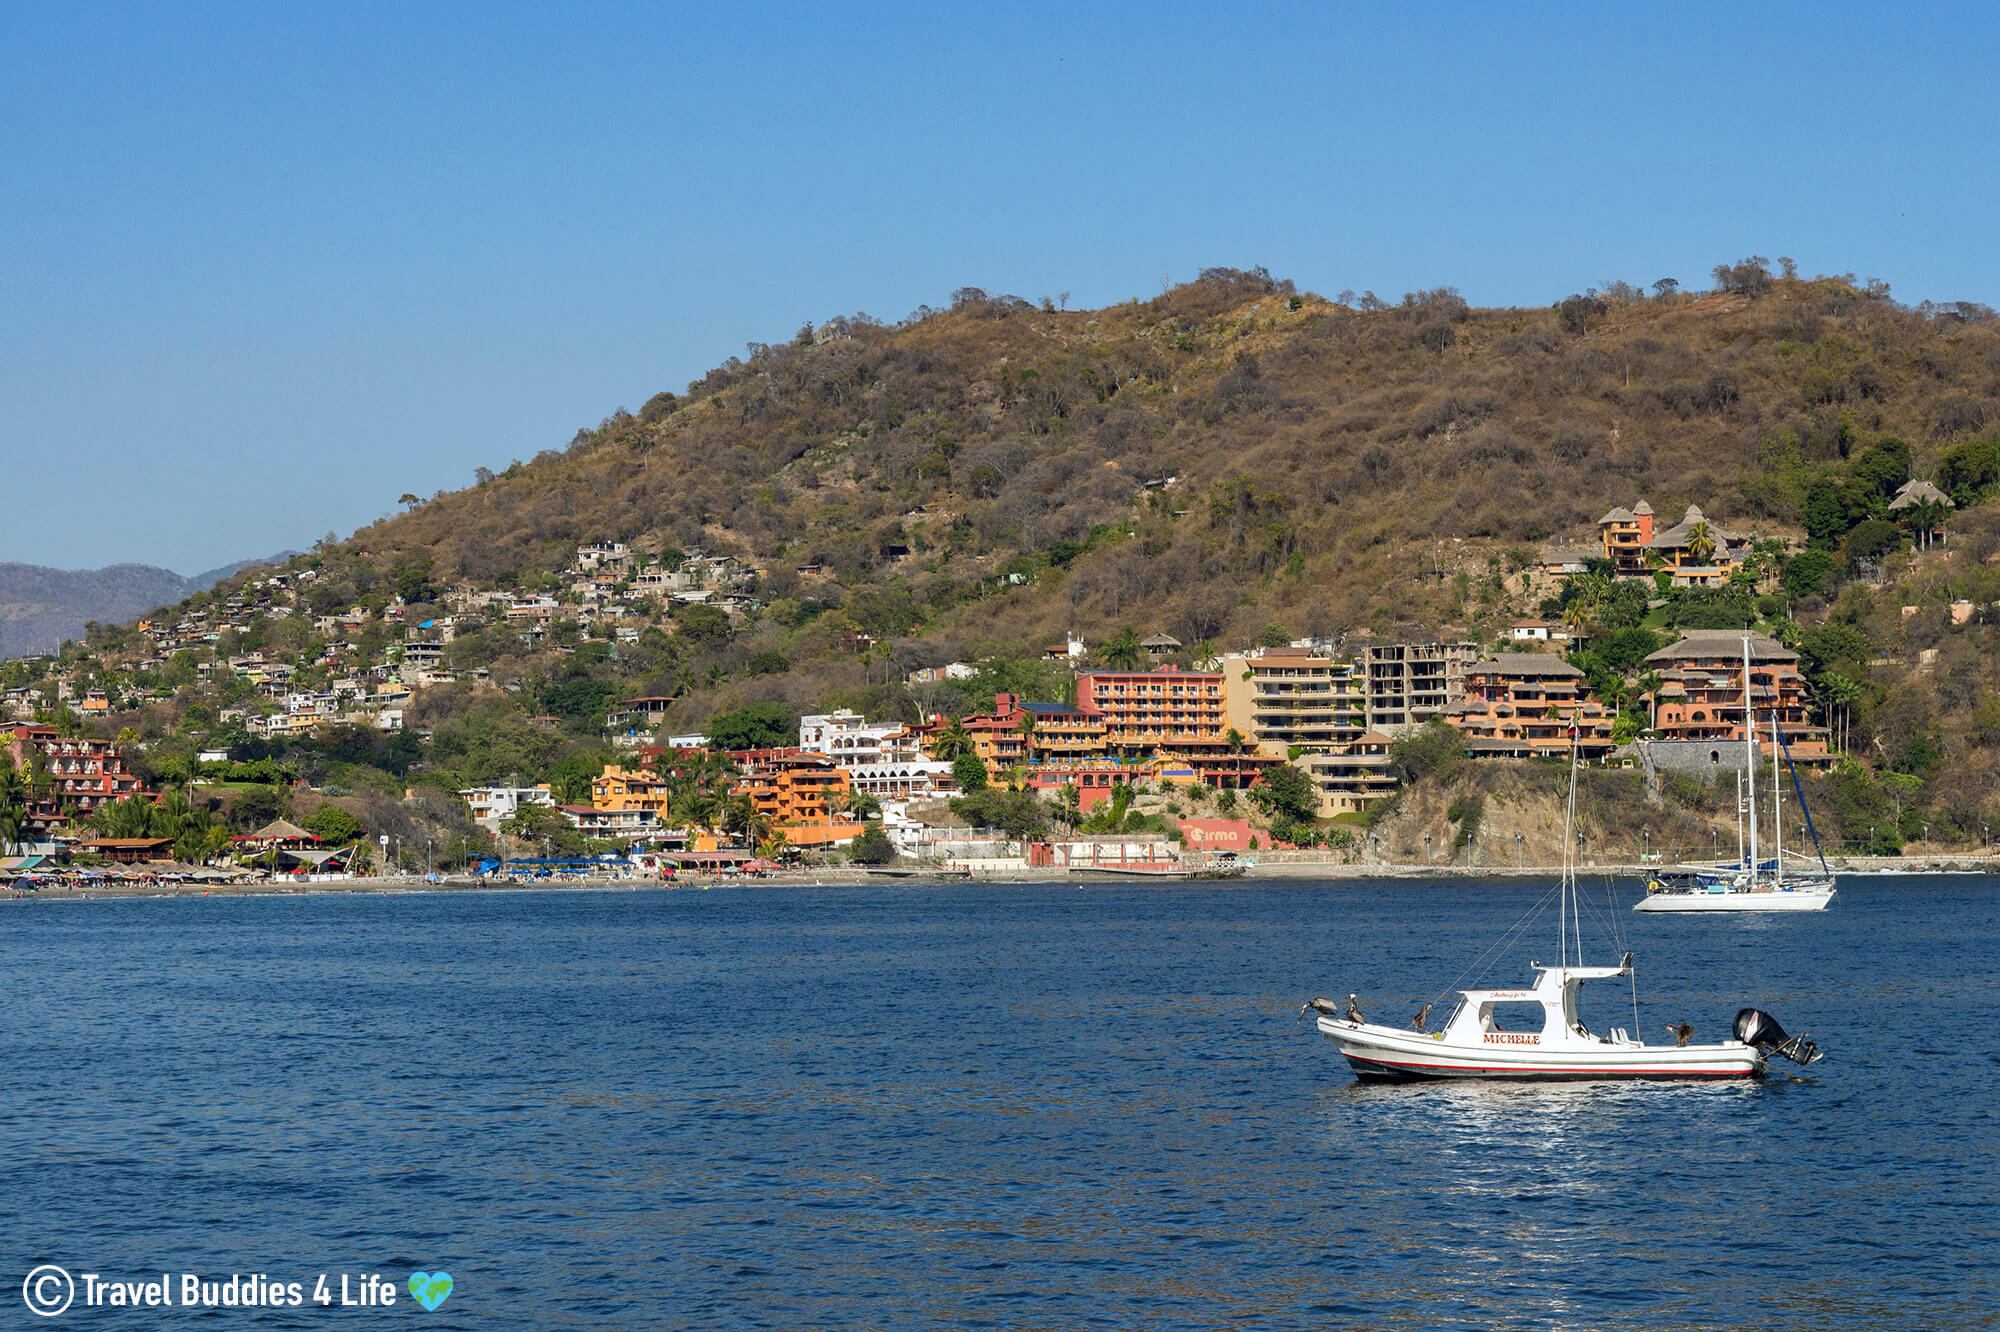 The Bay Of Zihuatanejo With Boats And Hotels, Mexico